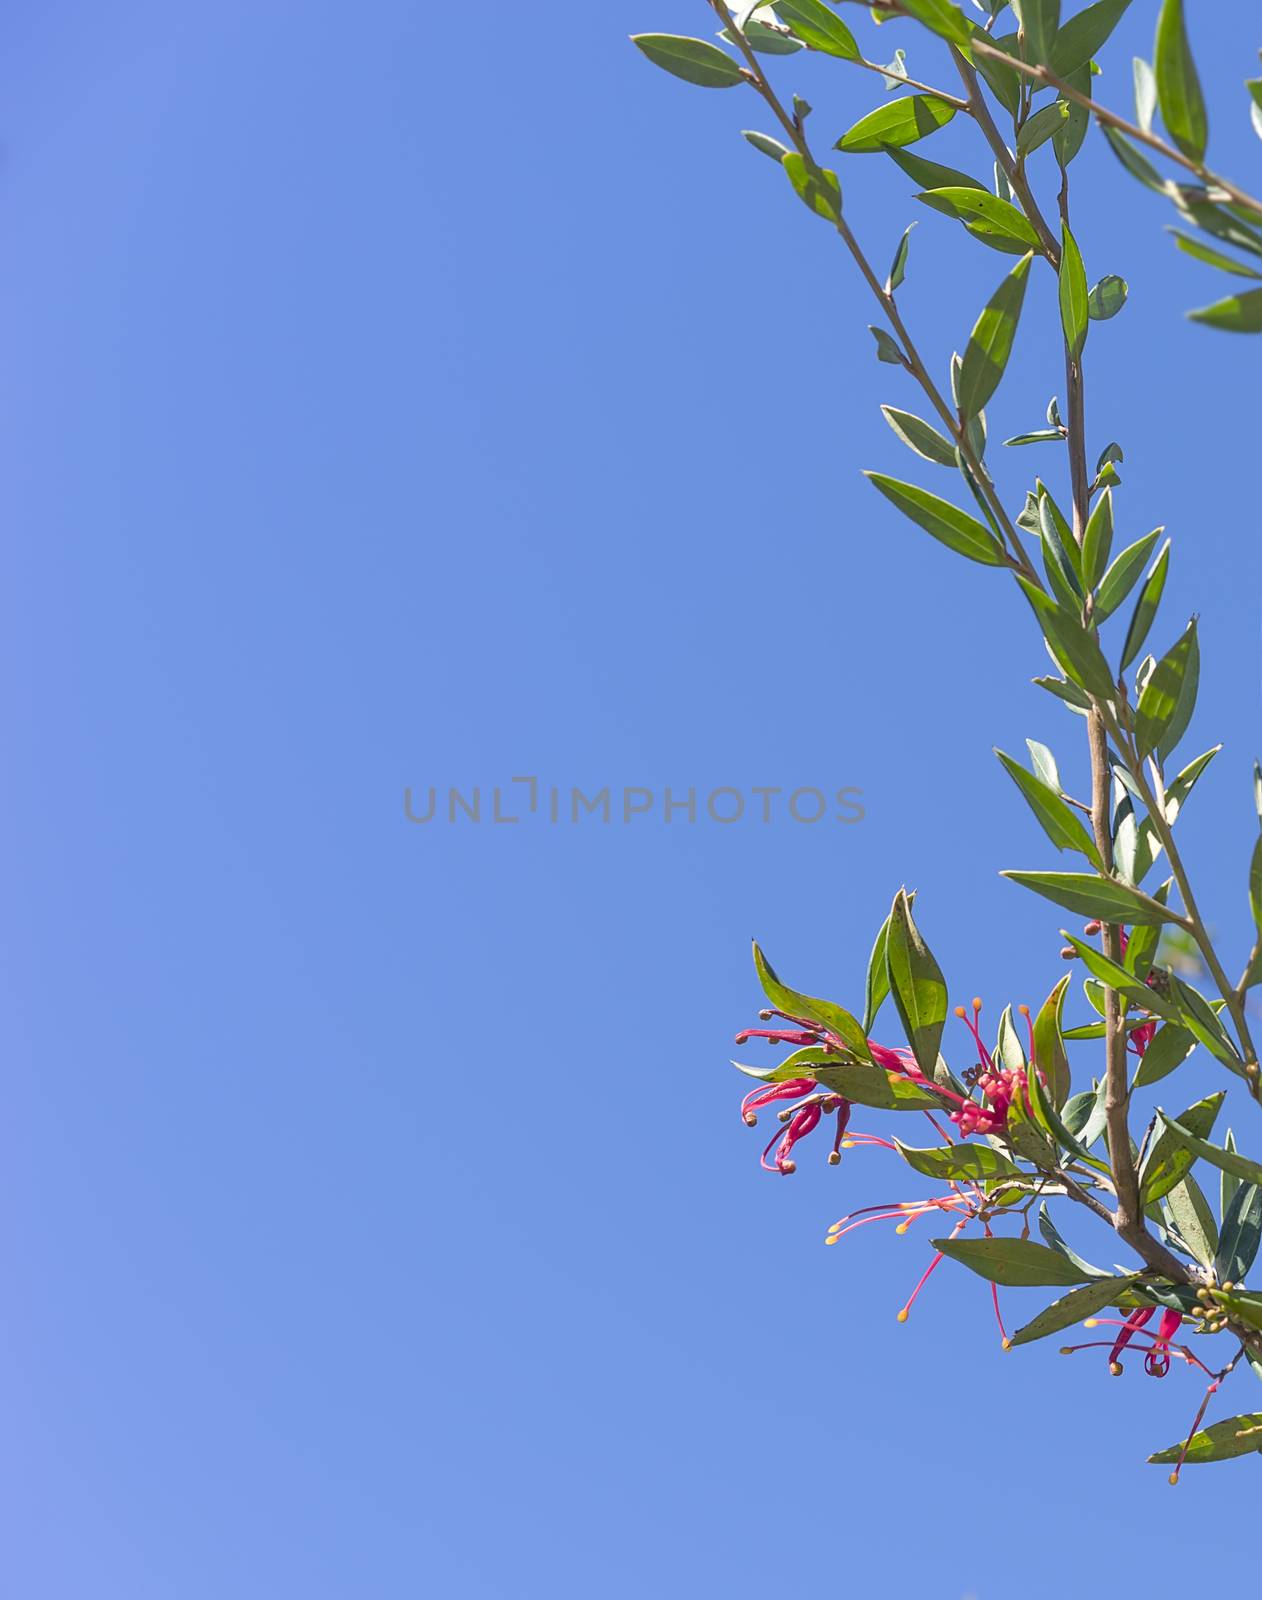 Australian Red grevillea flower with green foliage against clear blue sky  for condolences greeting card background